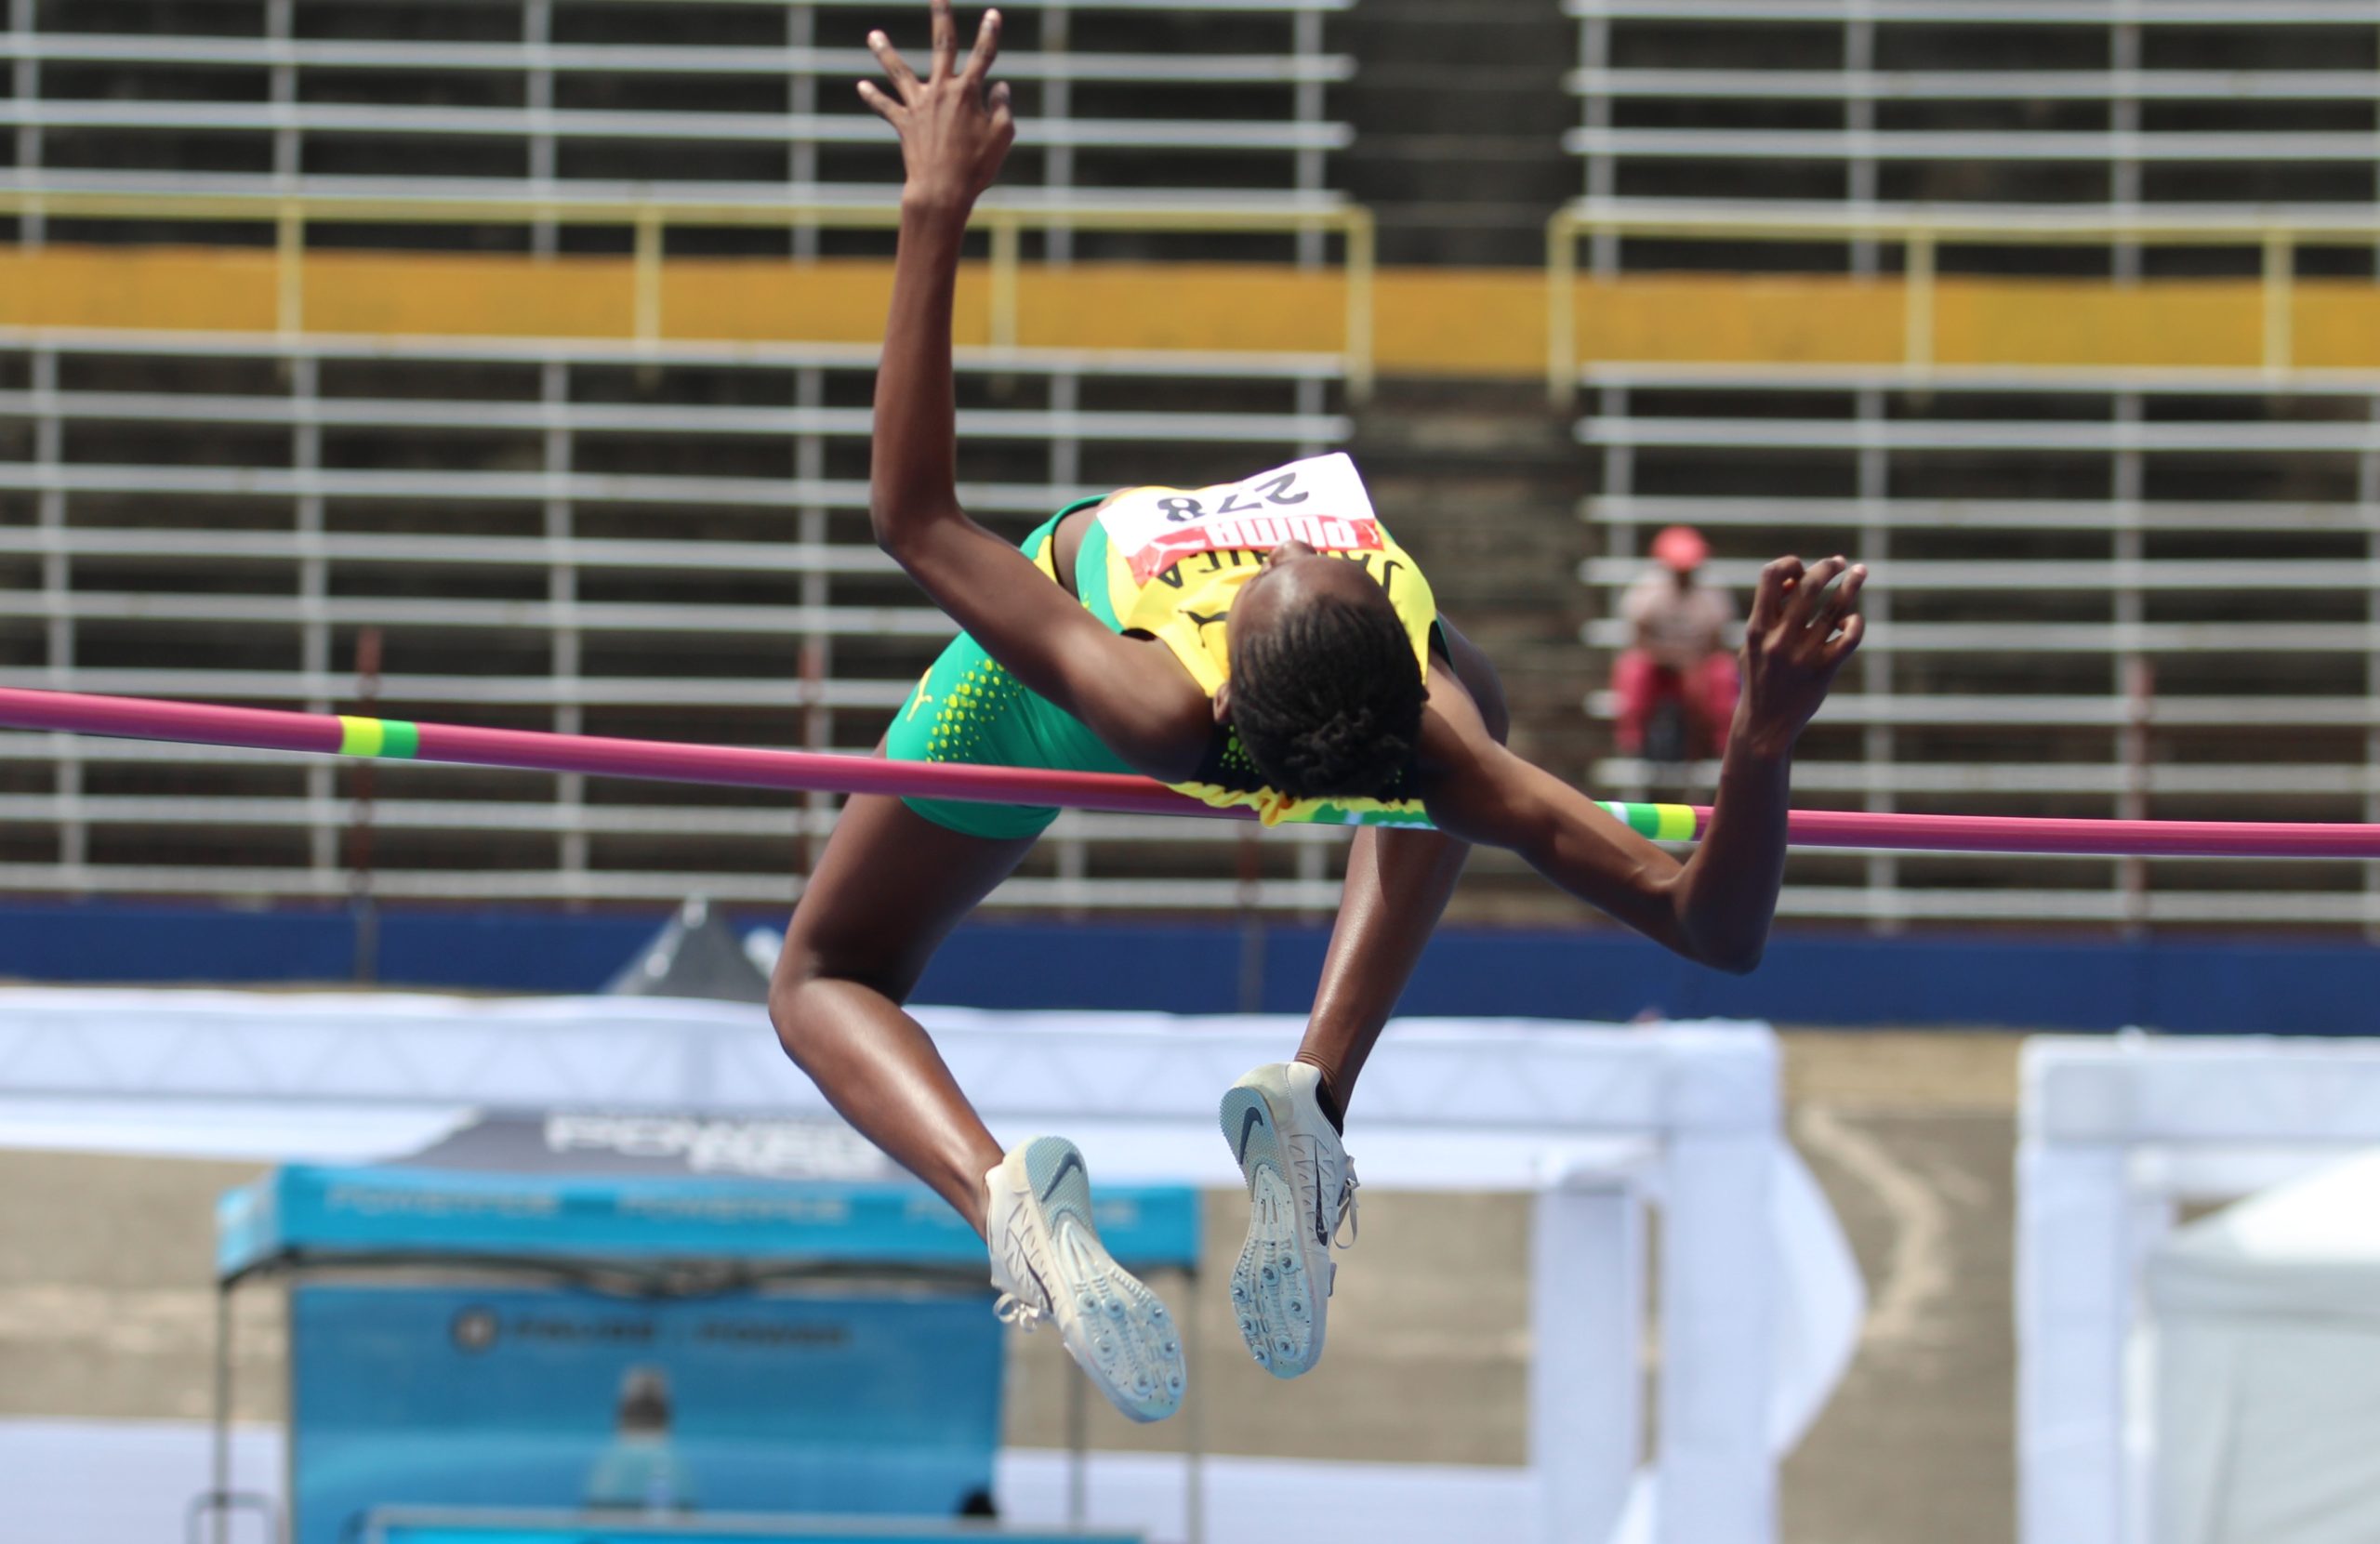 Danielle Noble of Jamaica wins the U17 girls' 100m final with a clearance of 1.73m at Carifta Games 2022